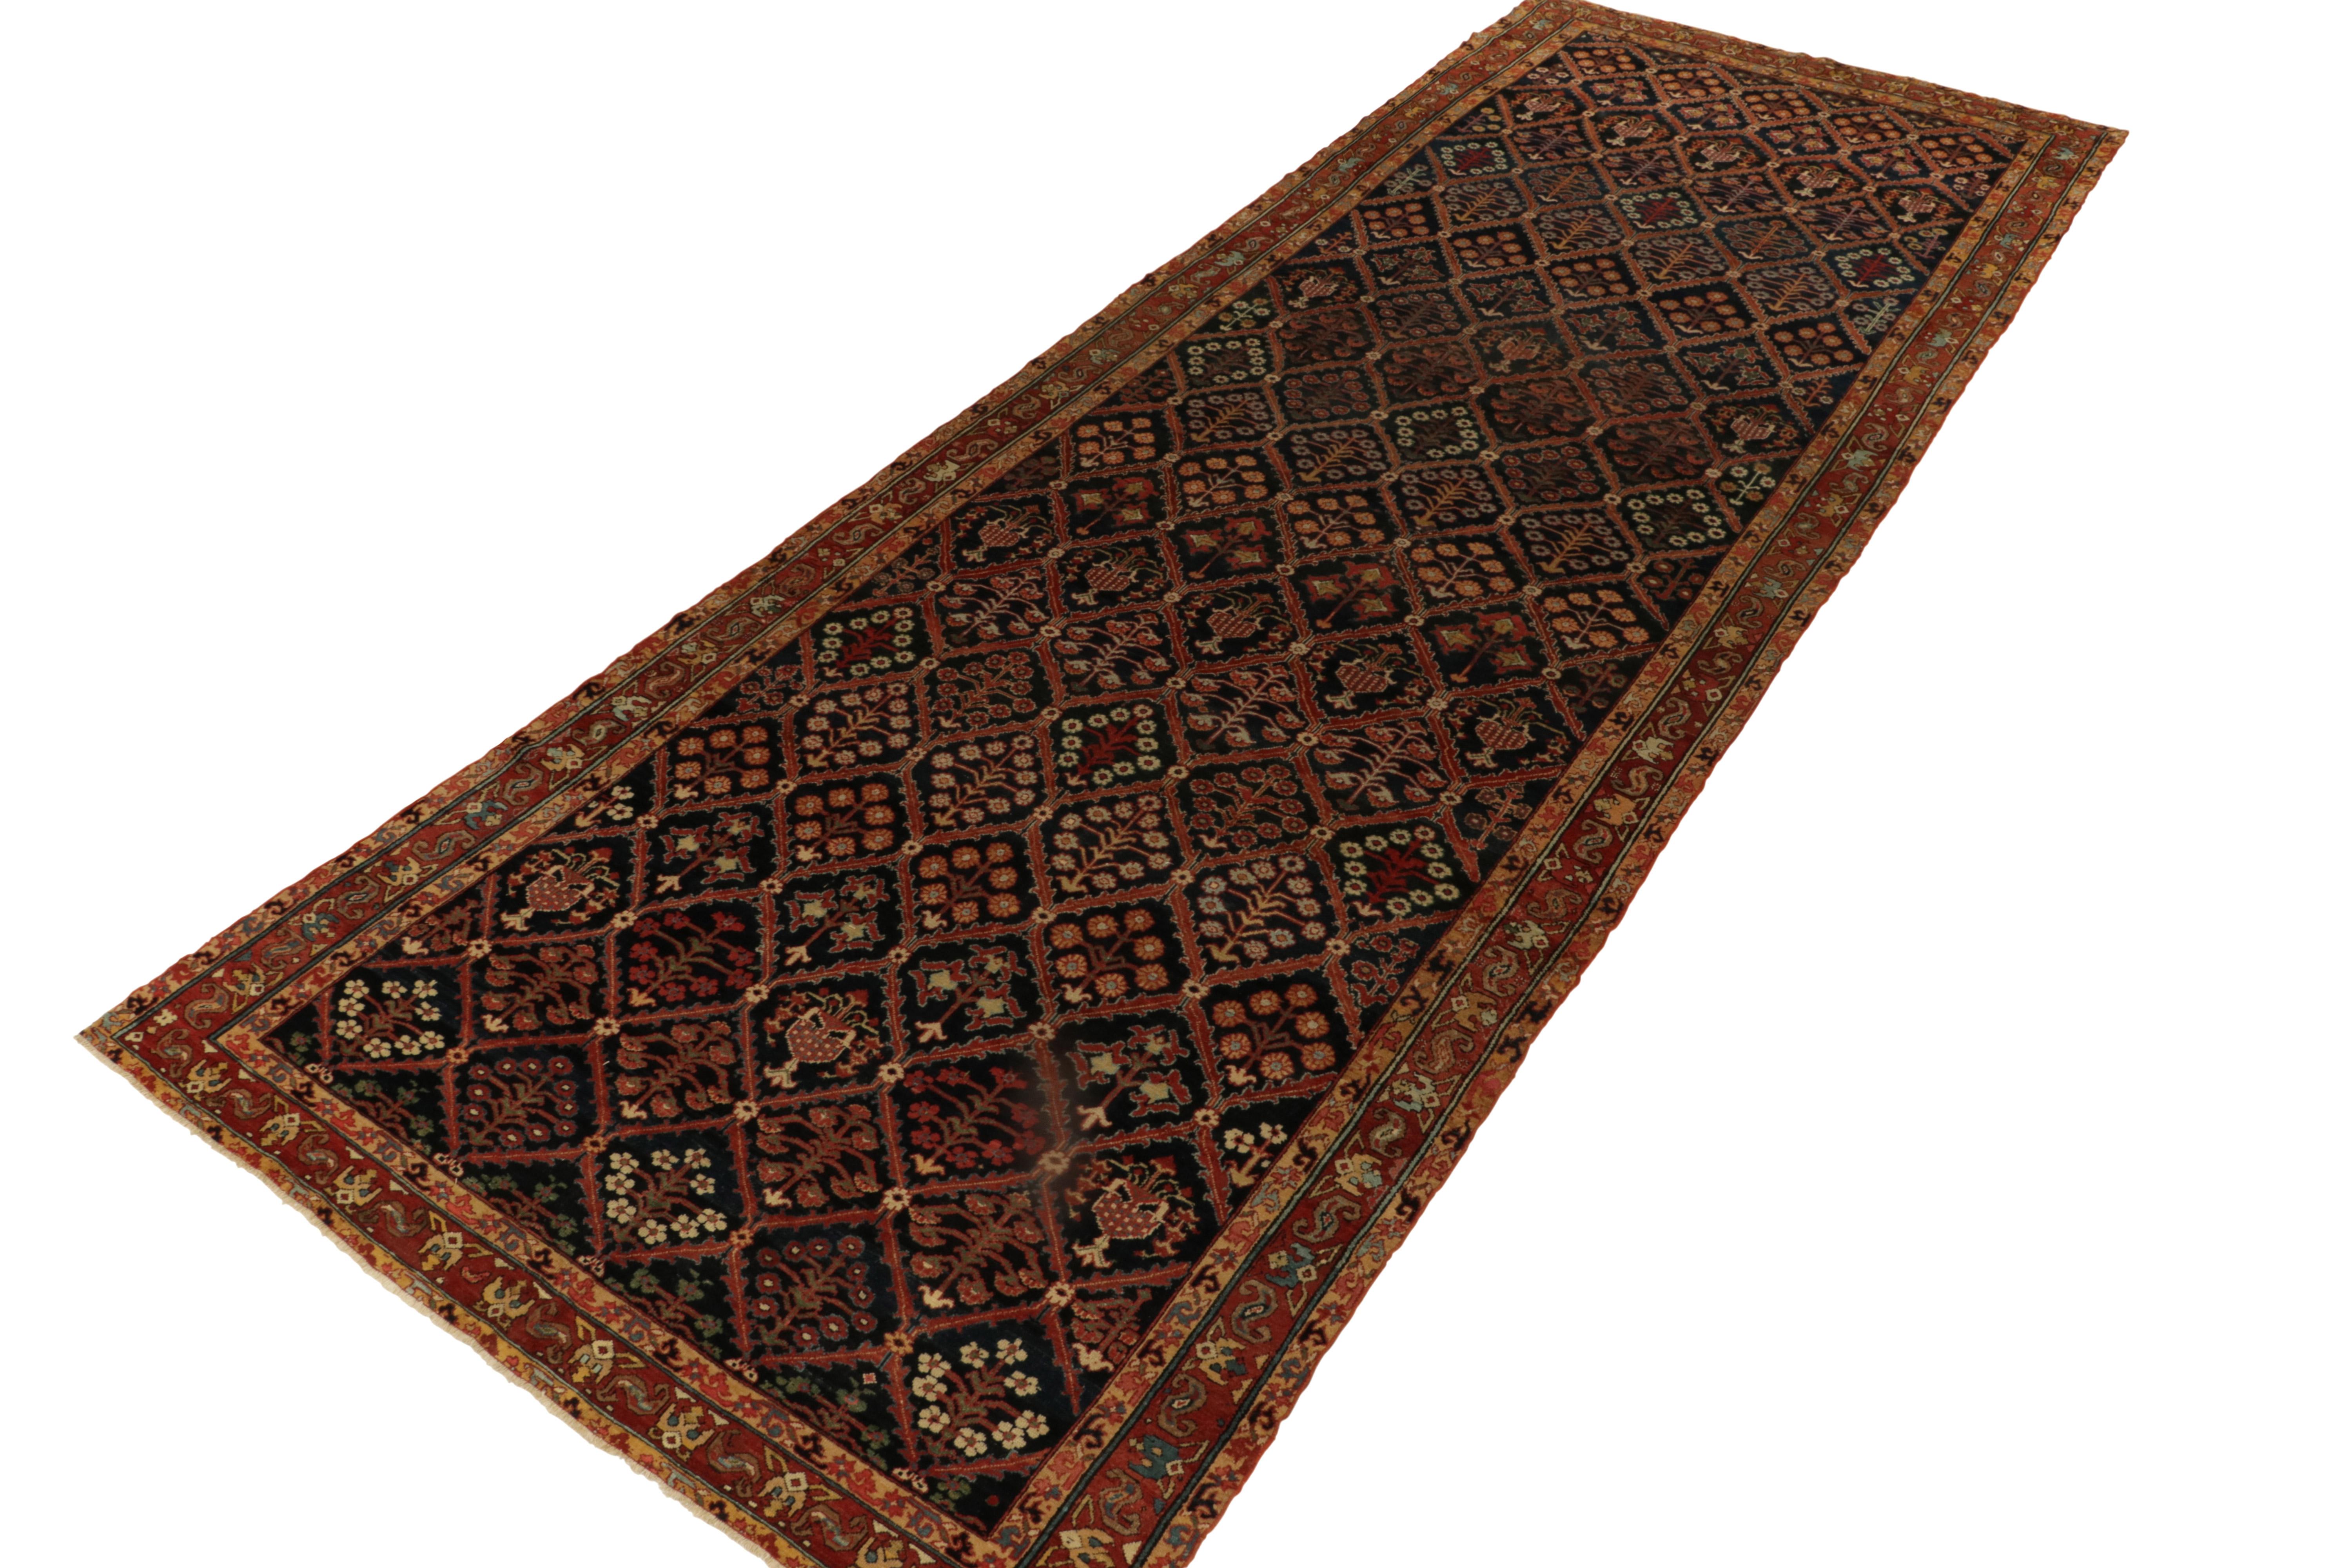 A rare 7x19 antique Persian rug of Joshaghan provenance, among the latest to join Rug & Kilim’s coveted Antique & Vintage curations. 

Hand-knotted in wool circa 1850-1860, gorgeous floral patterns flourish in a sophisticated, archaic play of rich